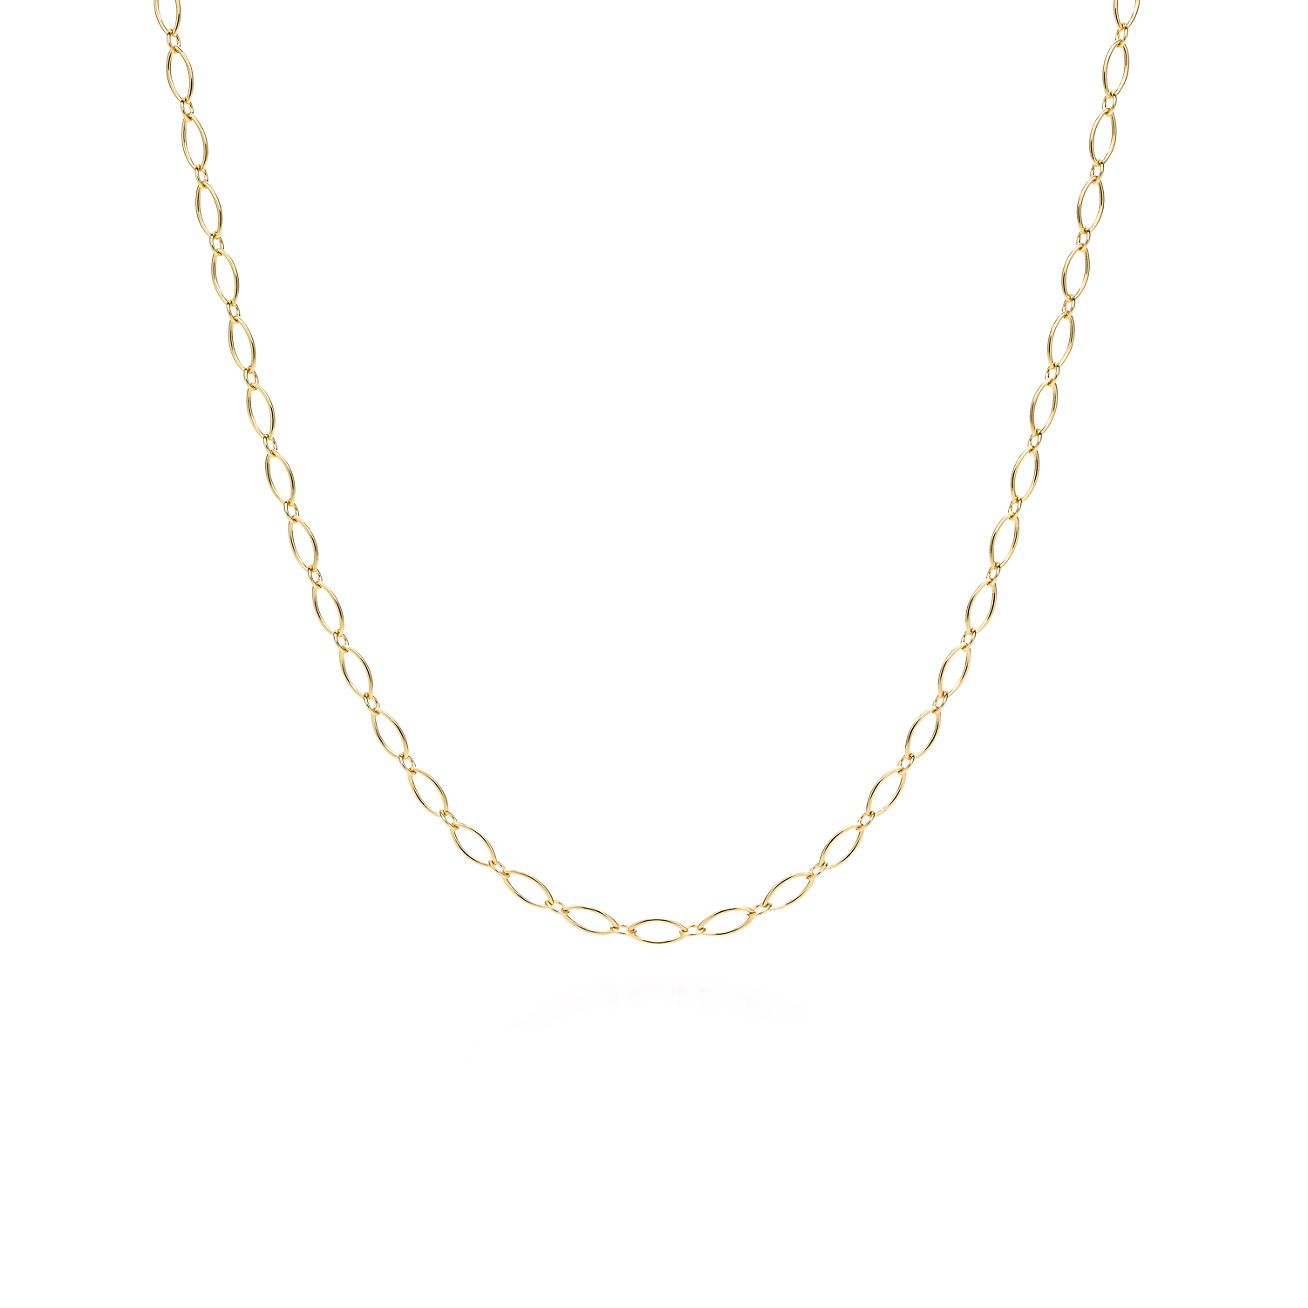 Oval link chain in 18k gold, 18\